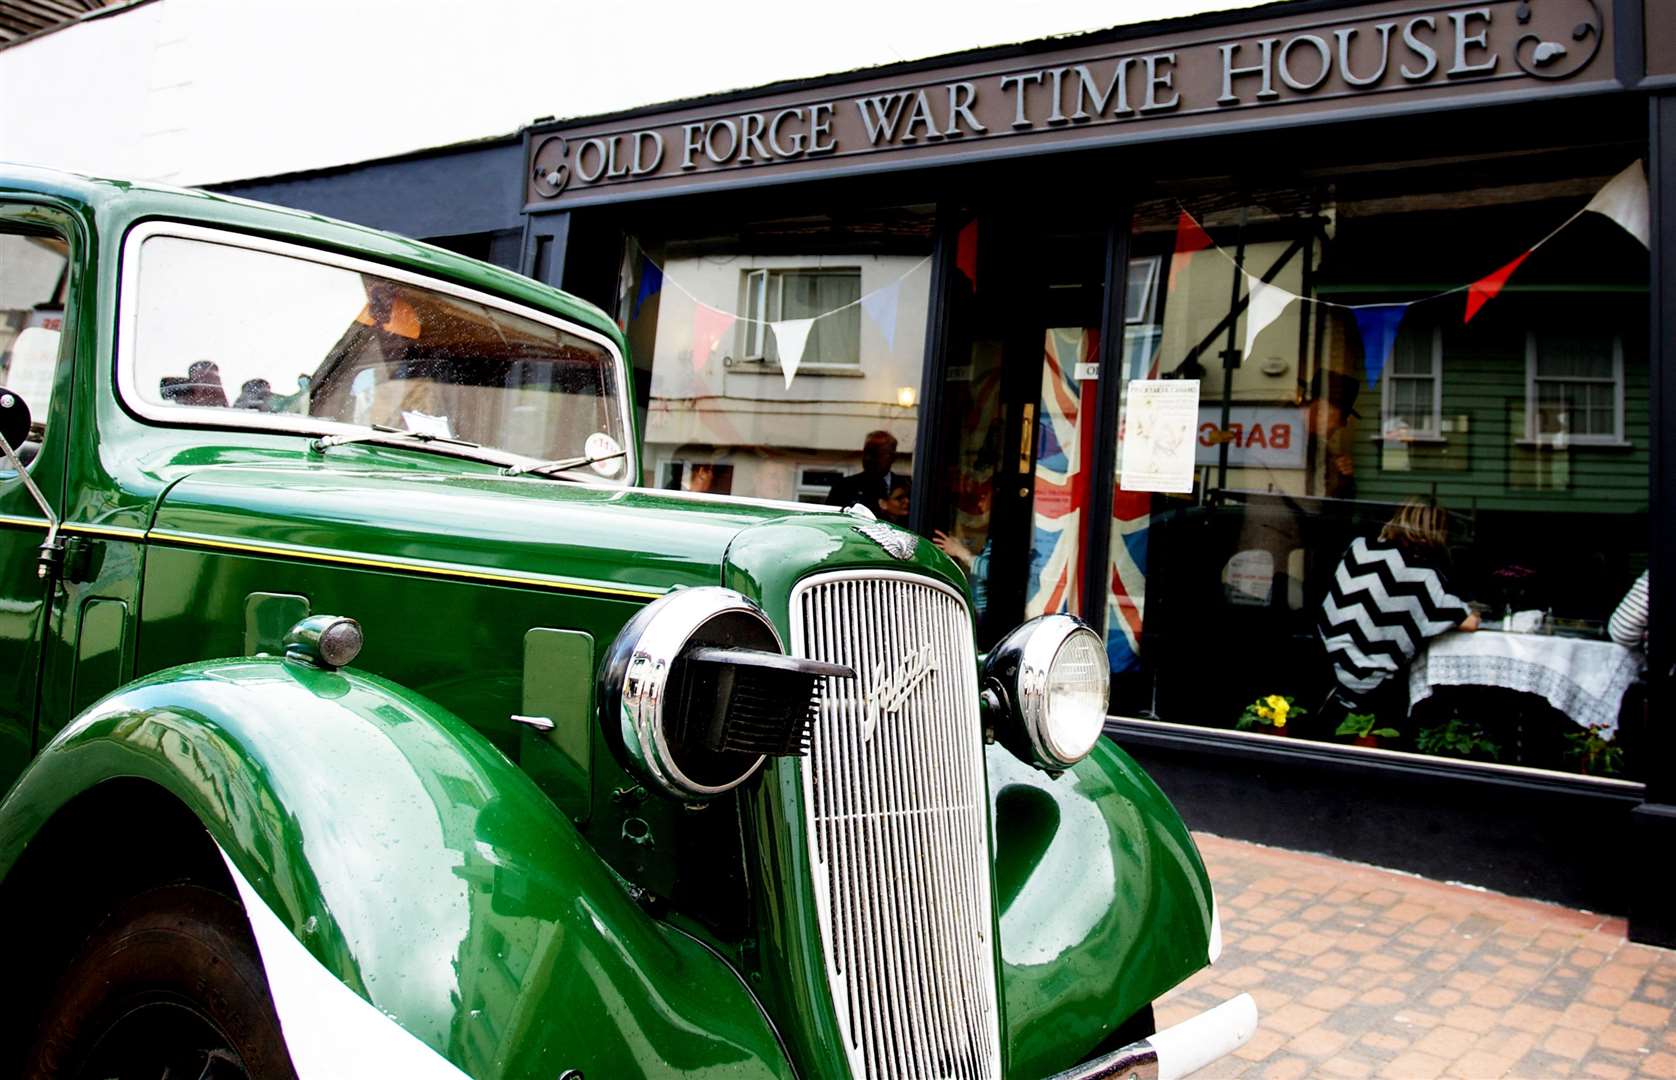 The wartime house in Sittingbourne is offering pre-booked tours